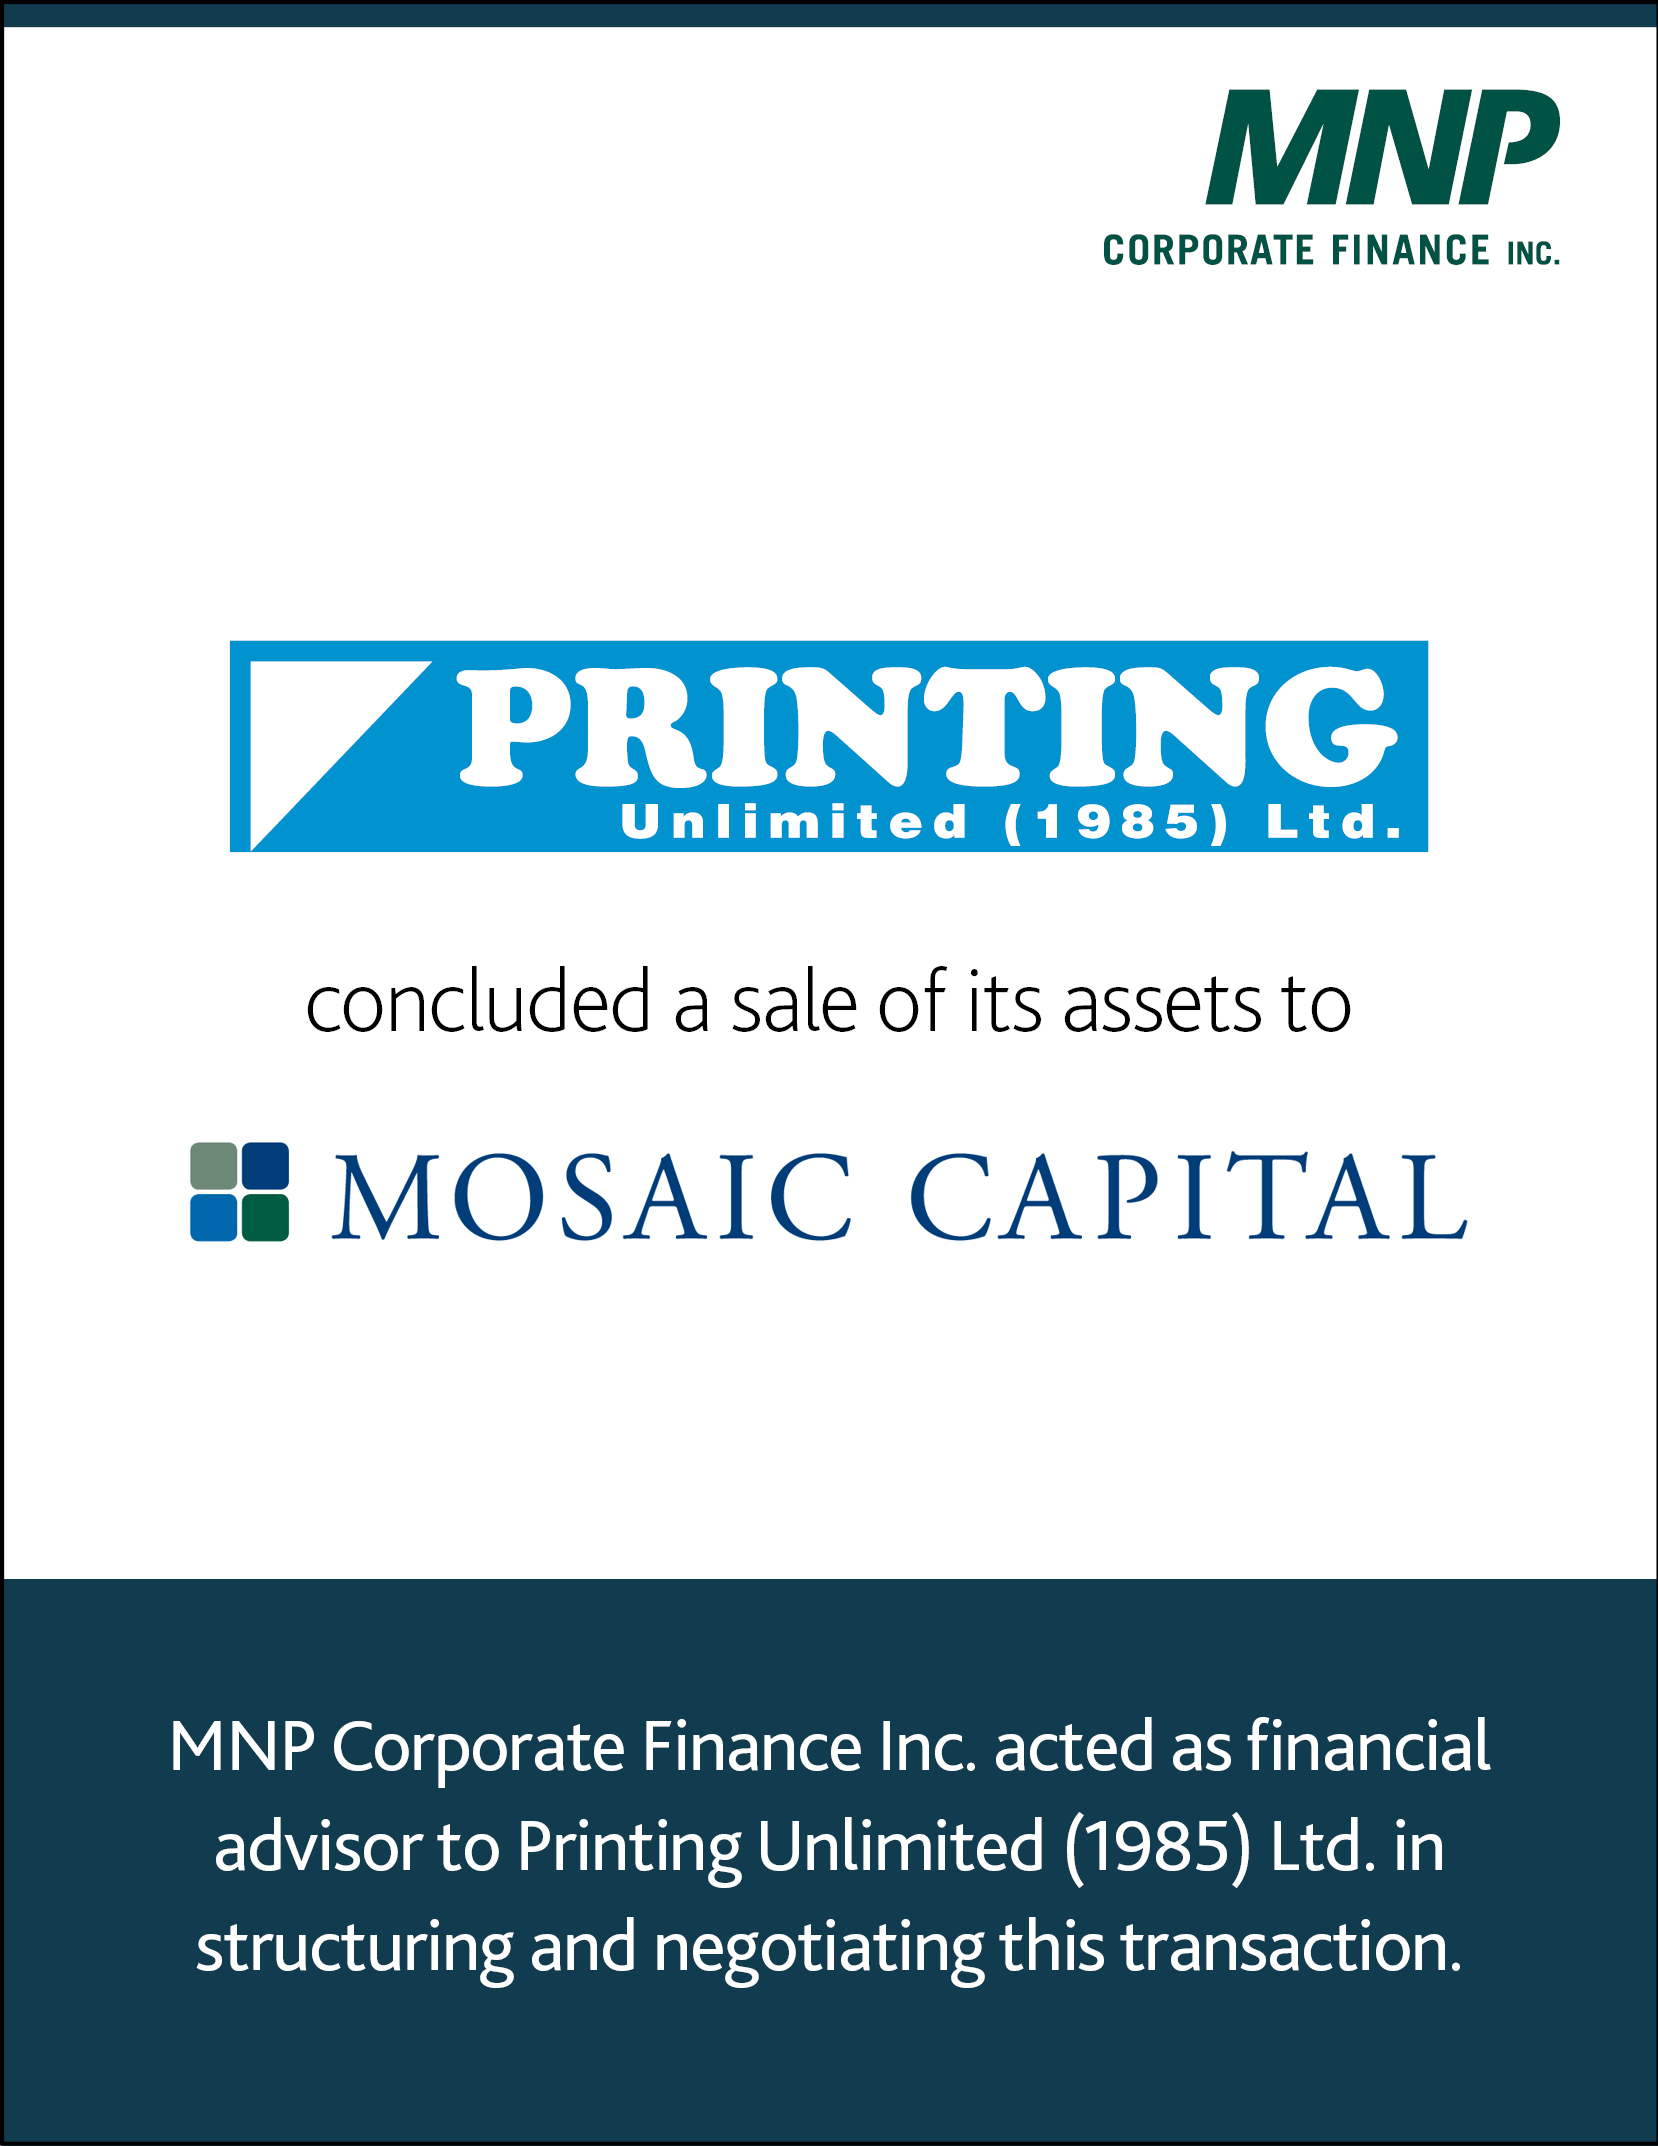 Printing Unlimited 1985 Ltd concluded a sale of its assets to Mosaic Capital